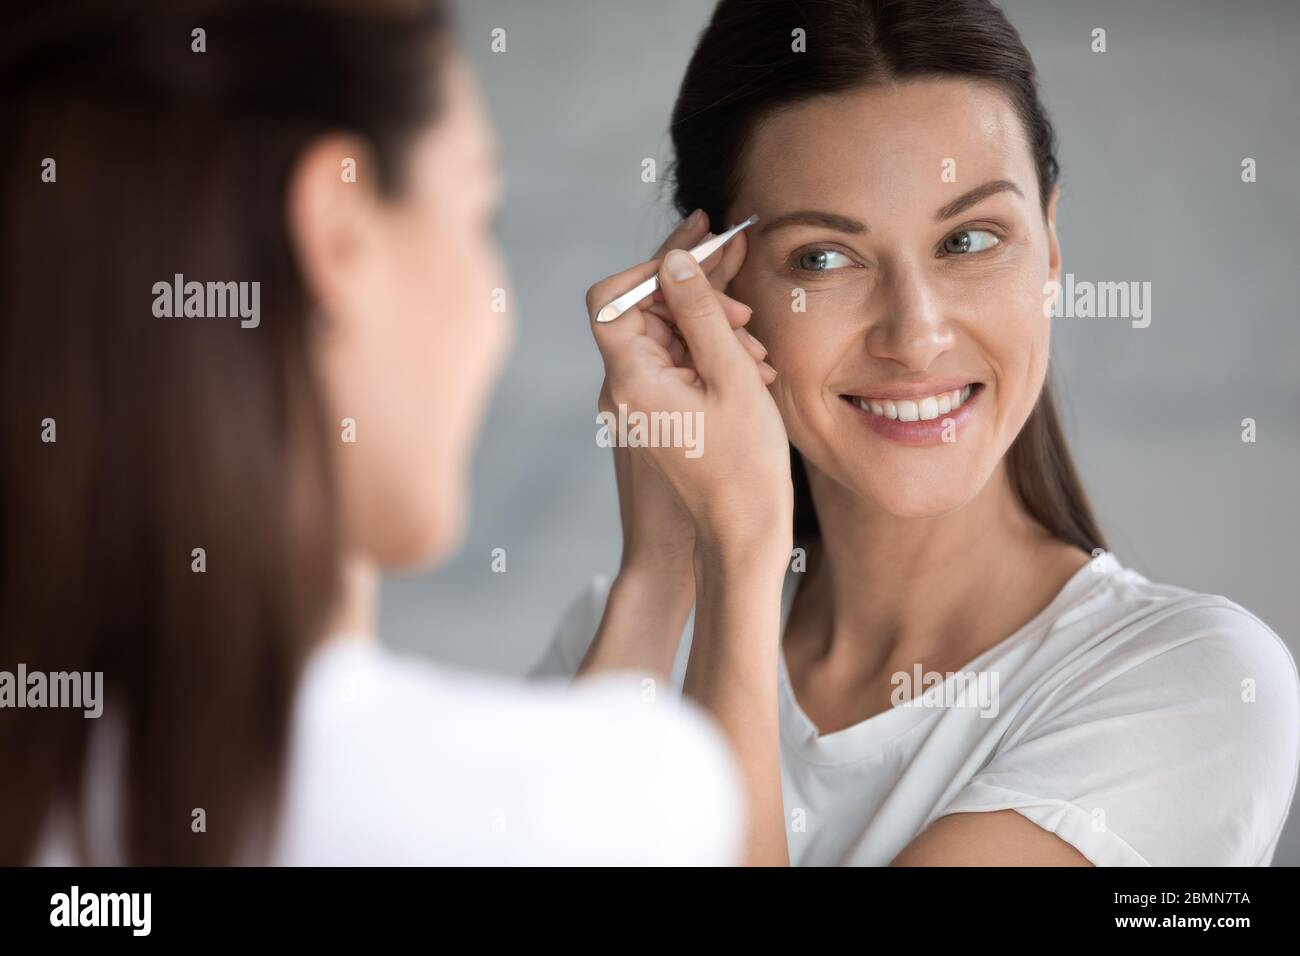 Woman plucks eyebrows, female face reflected in mirror closeup Stock Photo